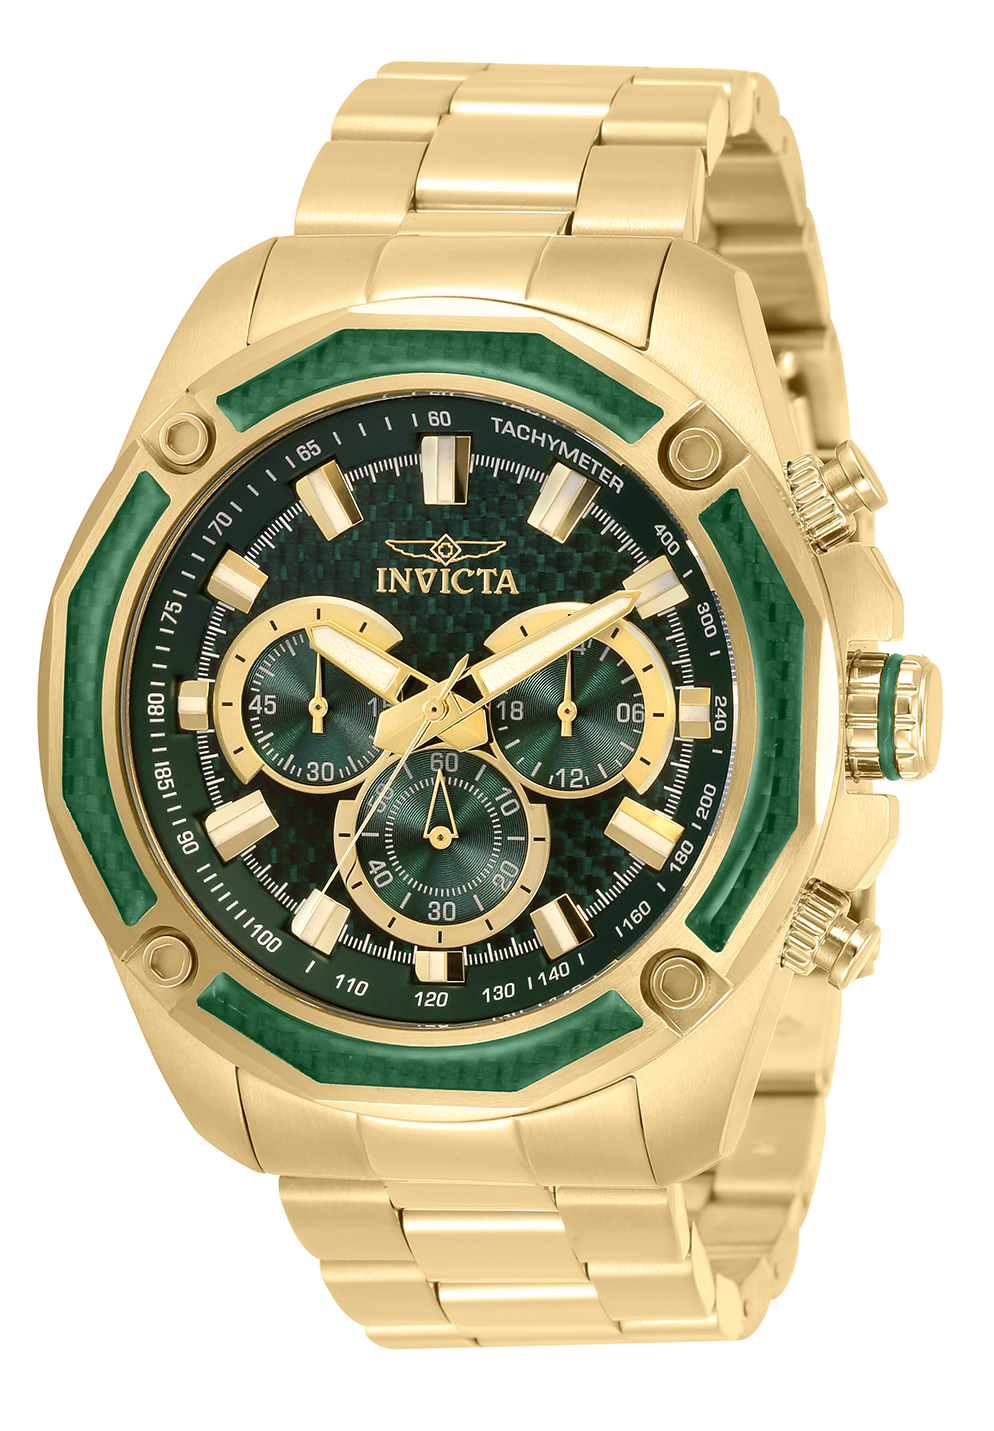 Invicta Aviator Quartz Mens Watch - 48mm Stainless Steel Case, Stainless Steel Band, Gold (34157)